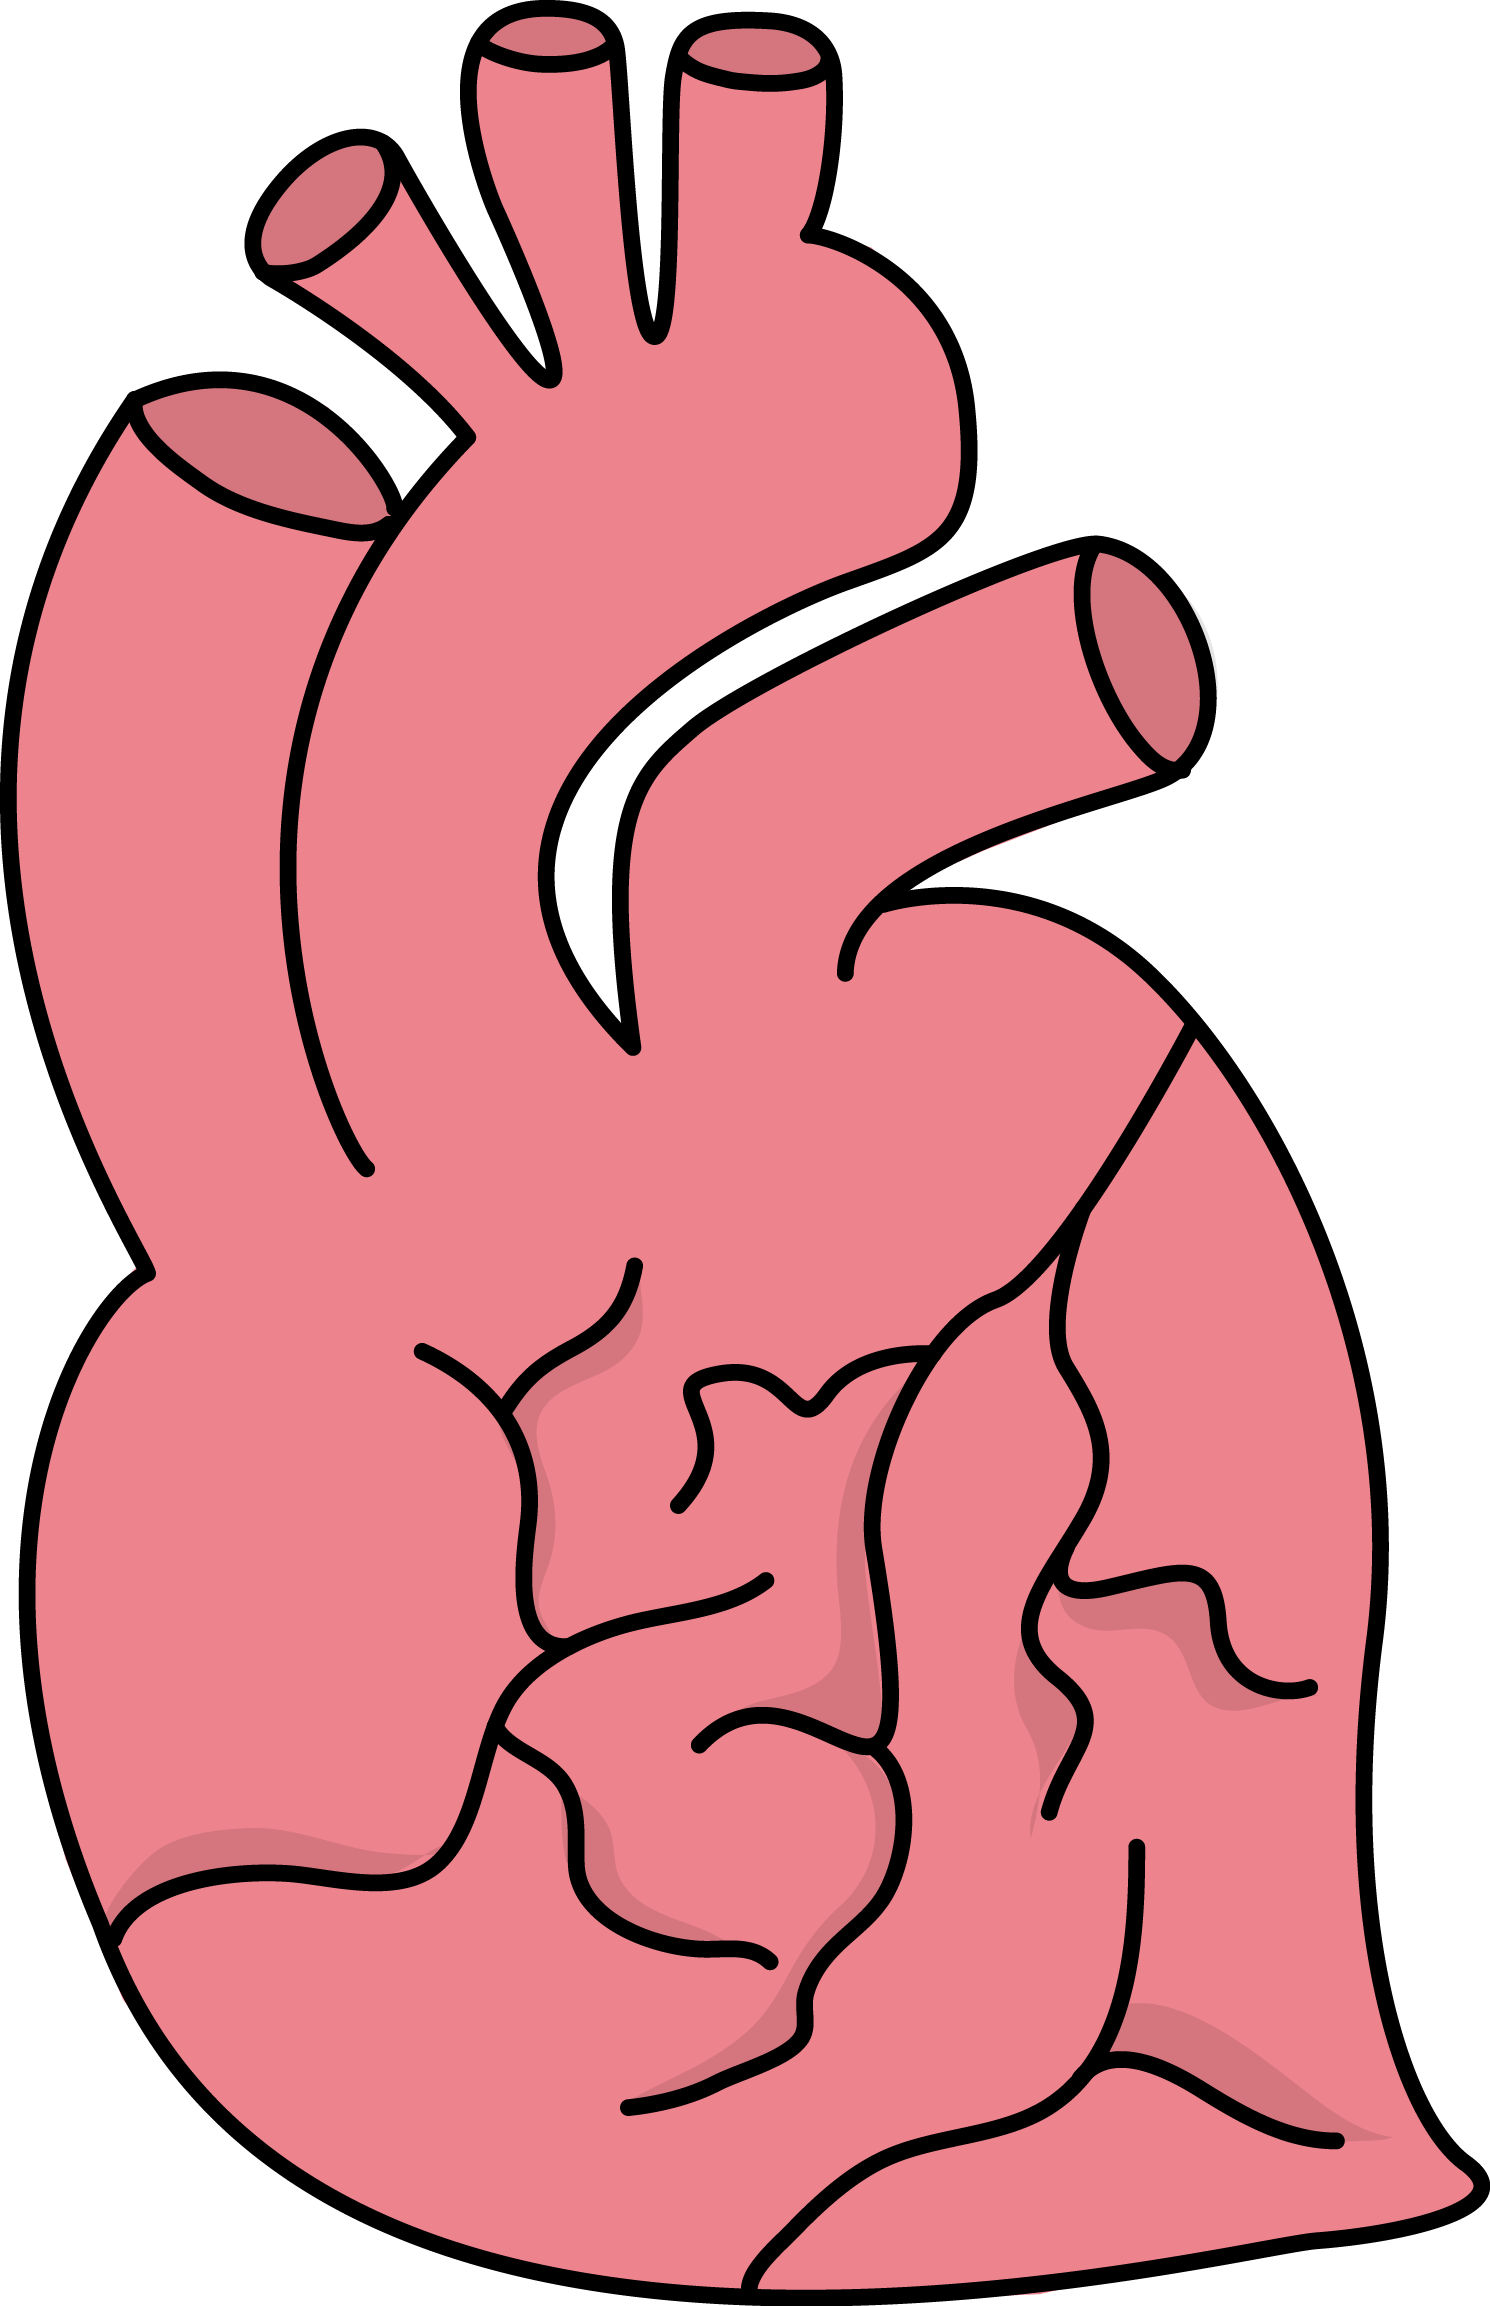 Fitness clipart healthy heart. Image for free health